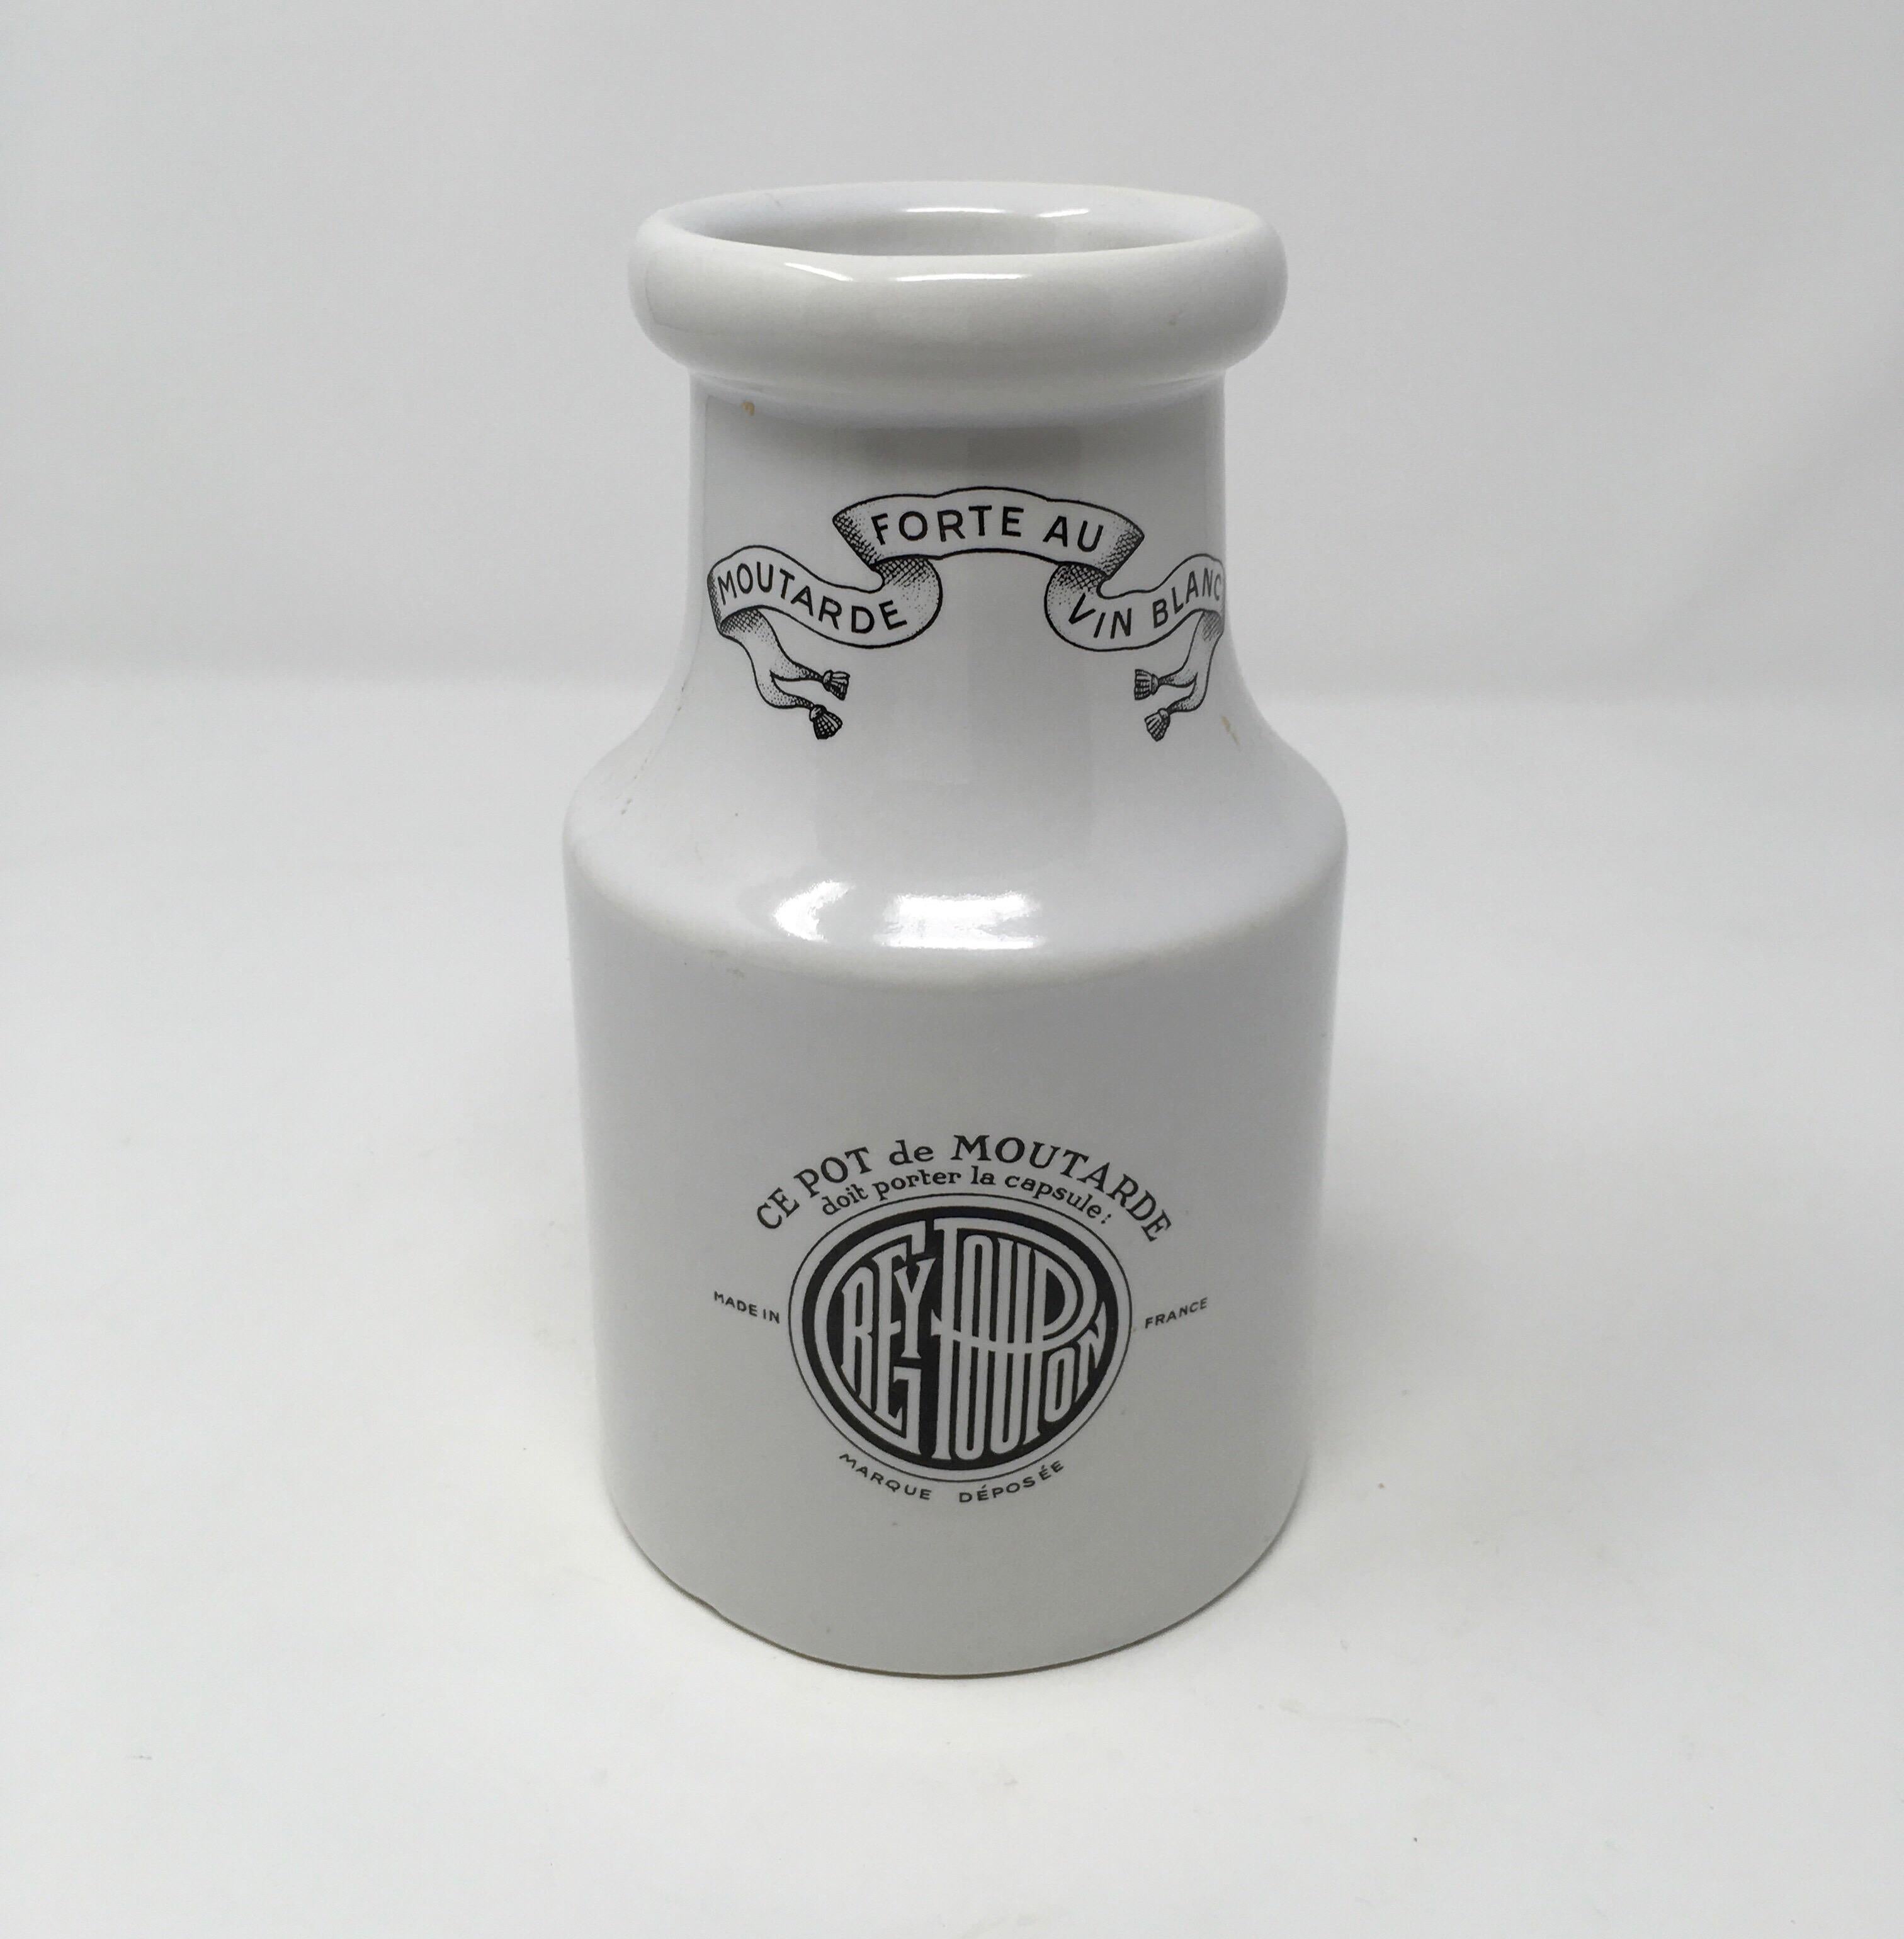 Found in the South of France, this vintage stoneware Digon Grey-Poupon mustard pot will add charm to your kitchen and would be a great addition to any stoneware collection. This pot has black transfers on both the front and reverse side and is